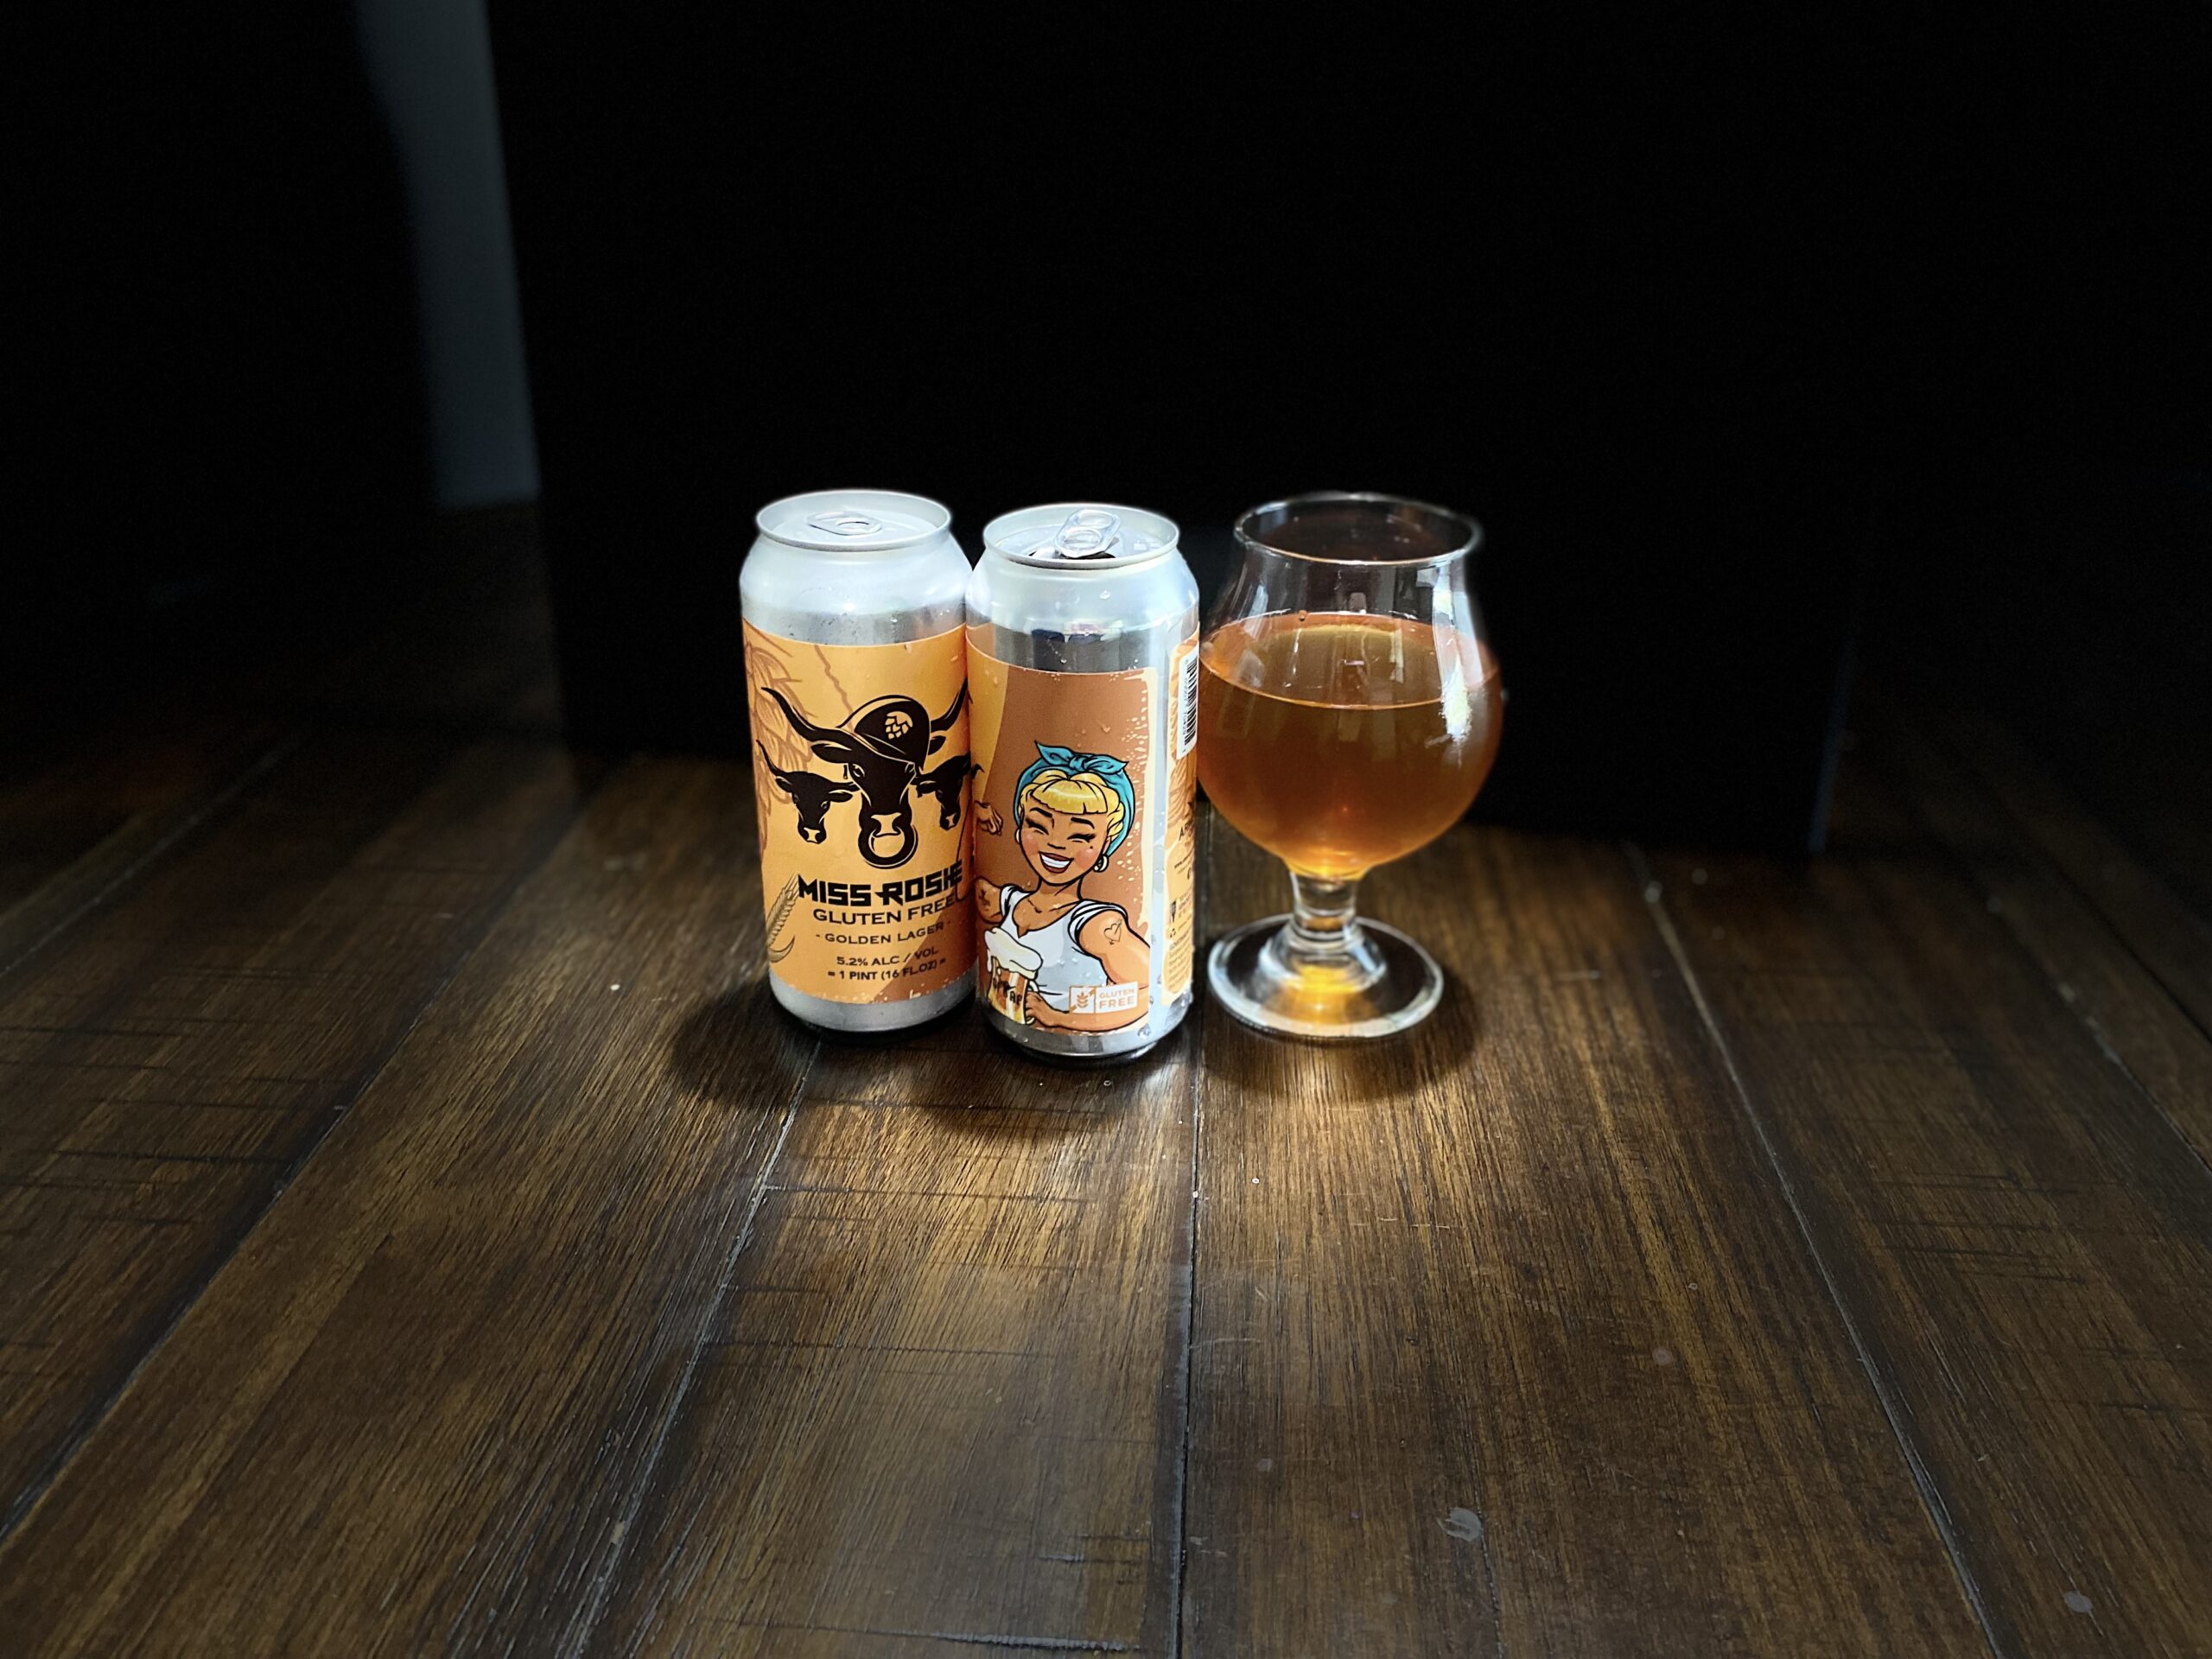 Miss Rosie is a golden lager with a beautiful color and sweet tones, Miss Rosie is a gluten-free delight. Mild but refreshing, this beer is perfect for a summer day. With a 5.2% ABV